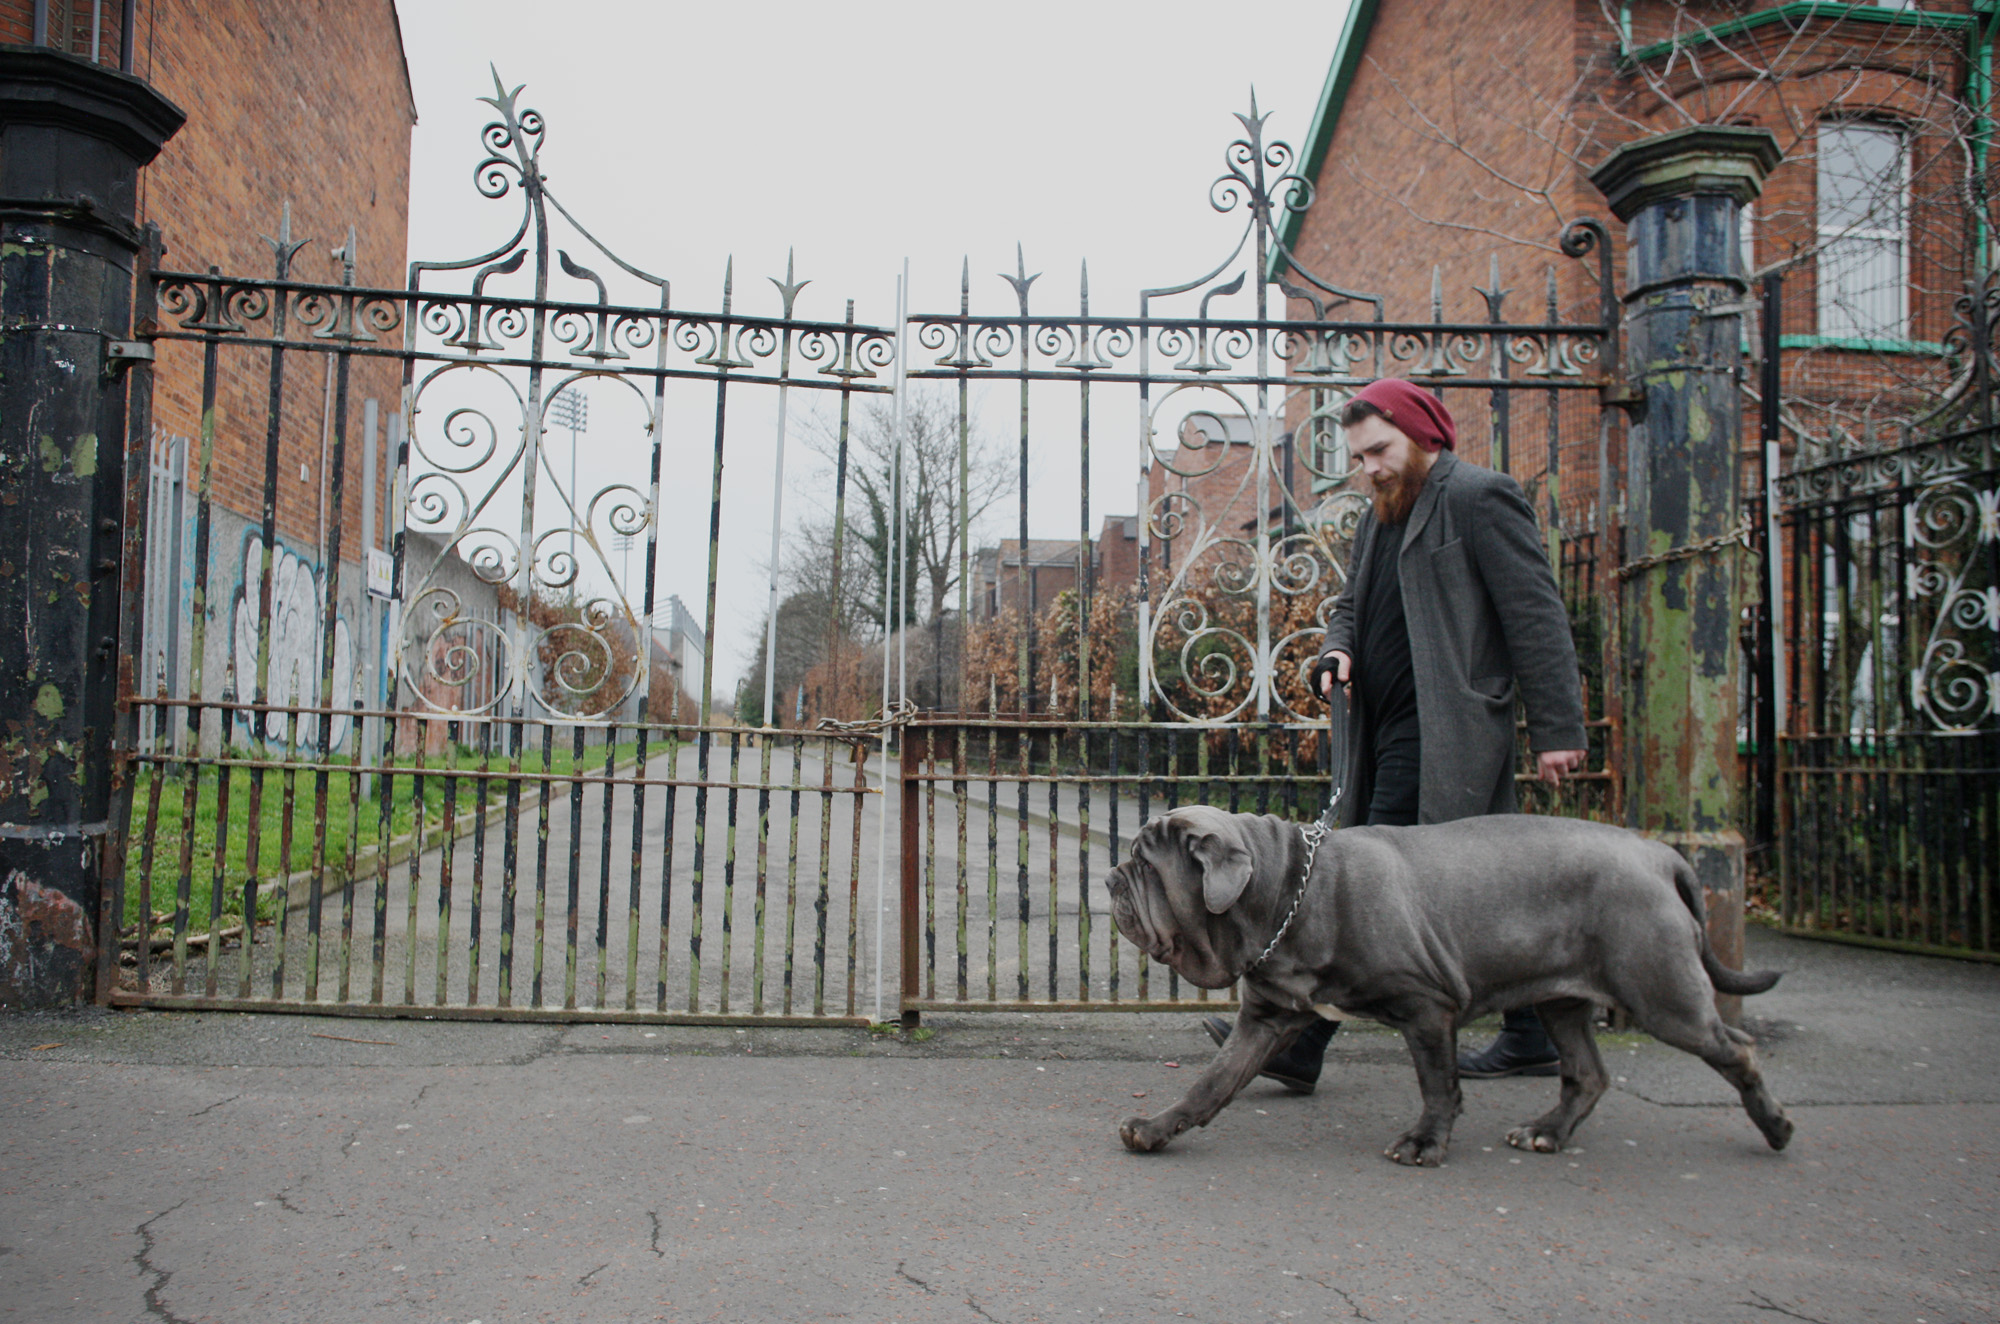 A stroll around the Waterworks for this Neapolitan mastiff will make her day